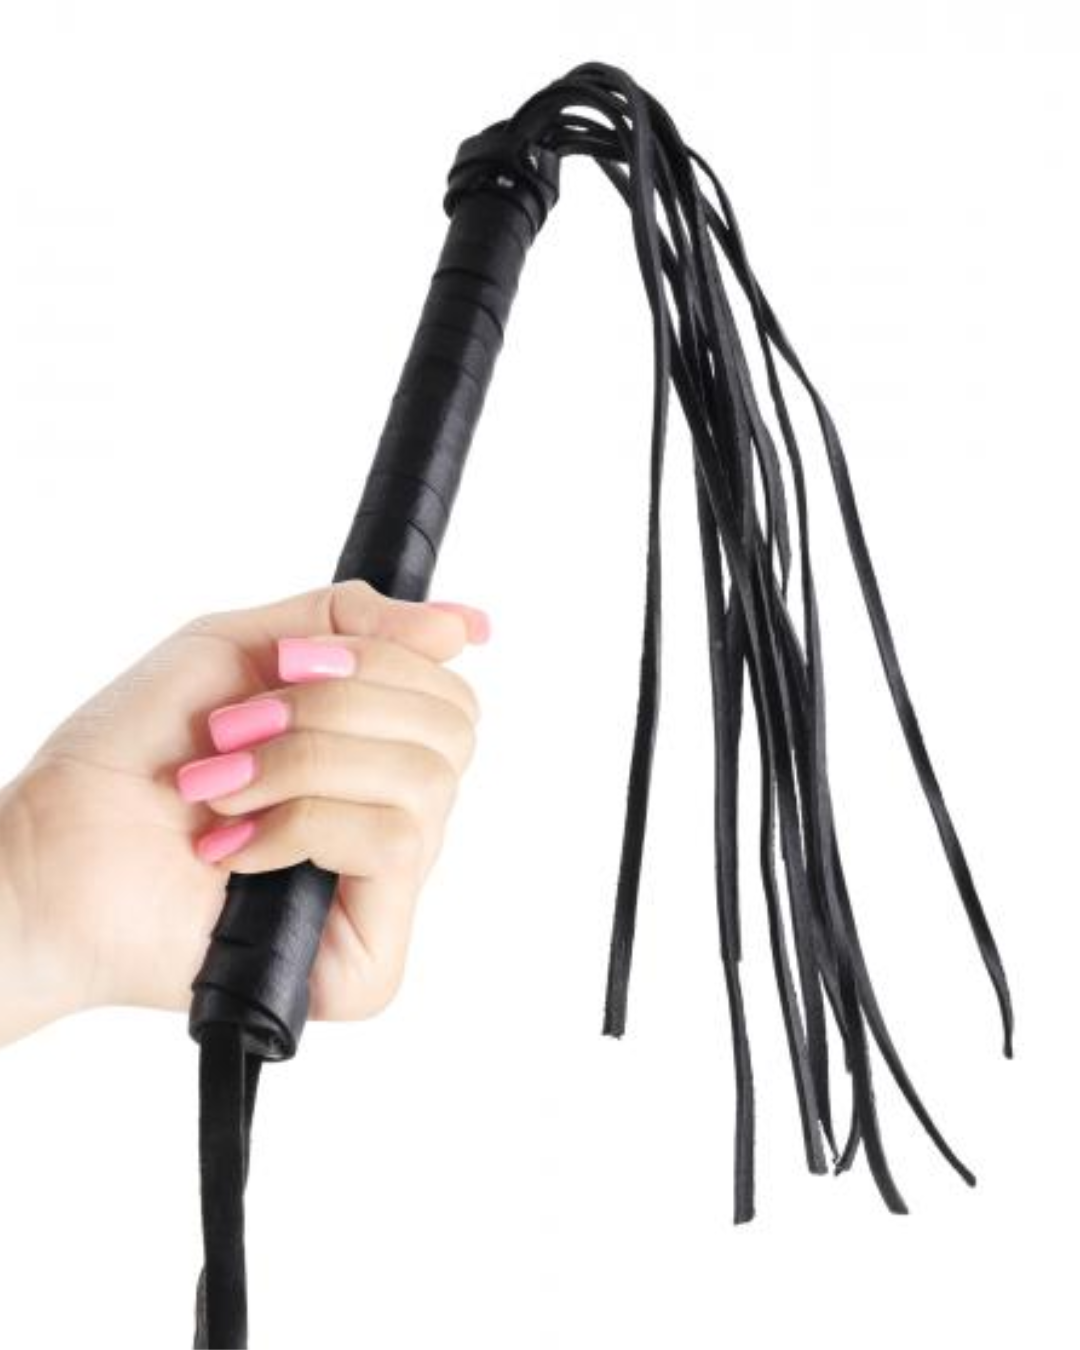 Fetish Fantasy Limited Edition Cat-O-Nine Tails Leather Whip